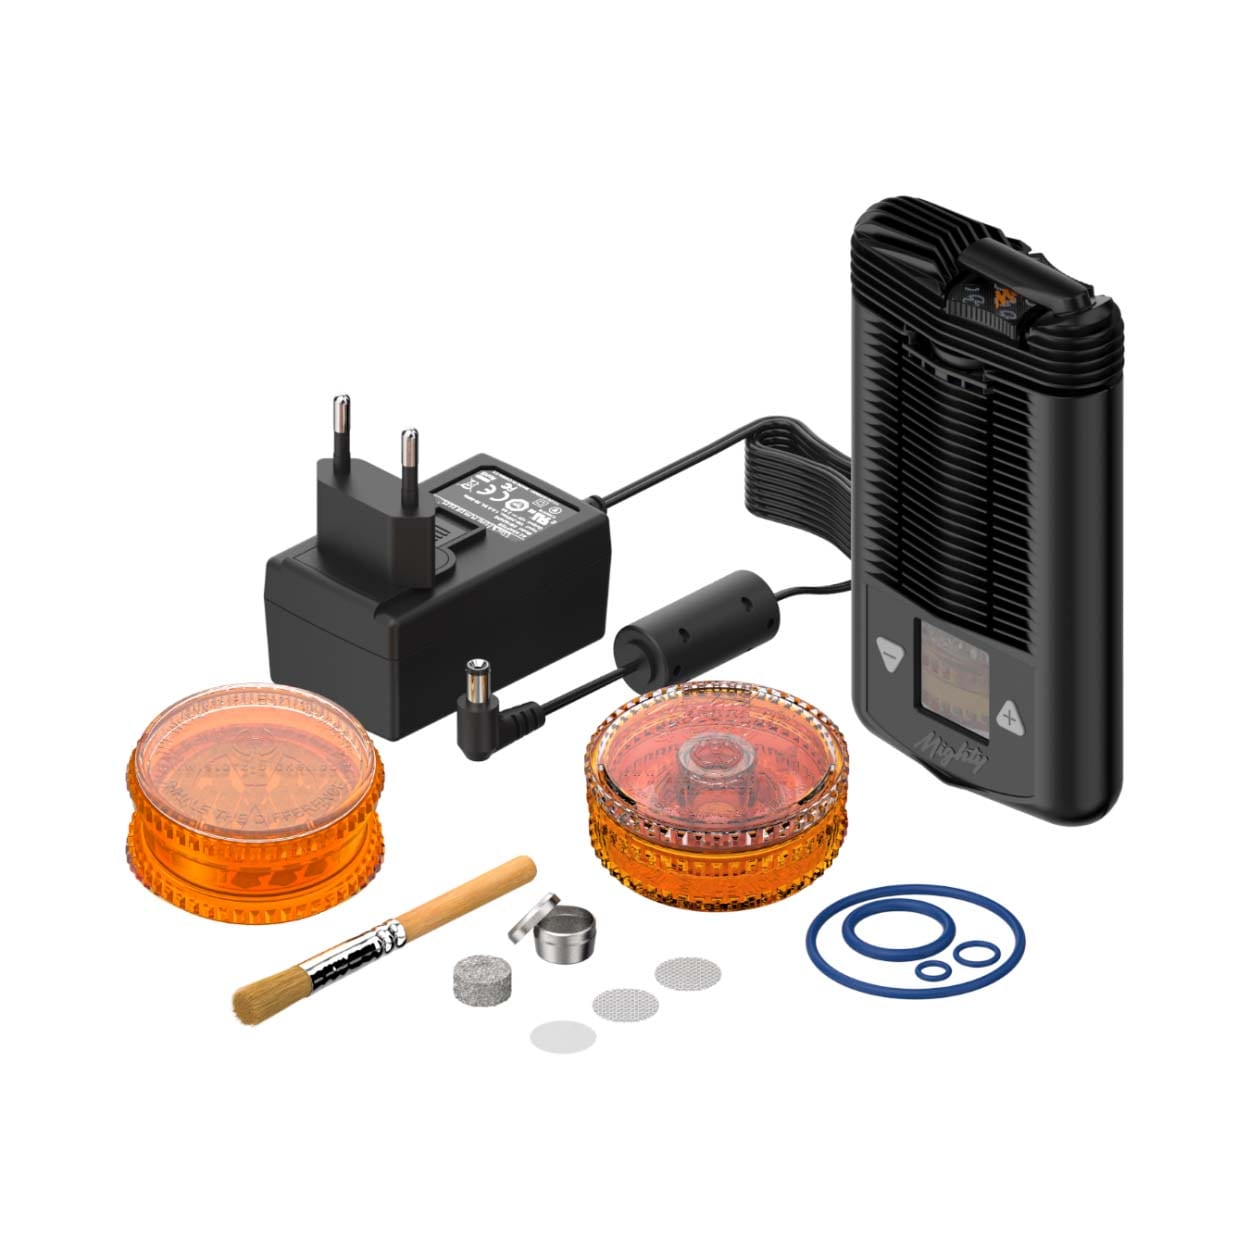 Mighty Dry Herb Vaporizer - Parts Included